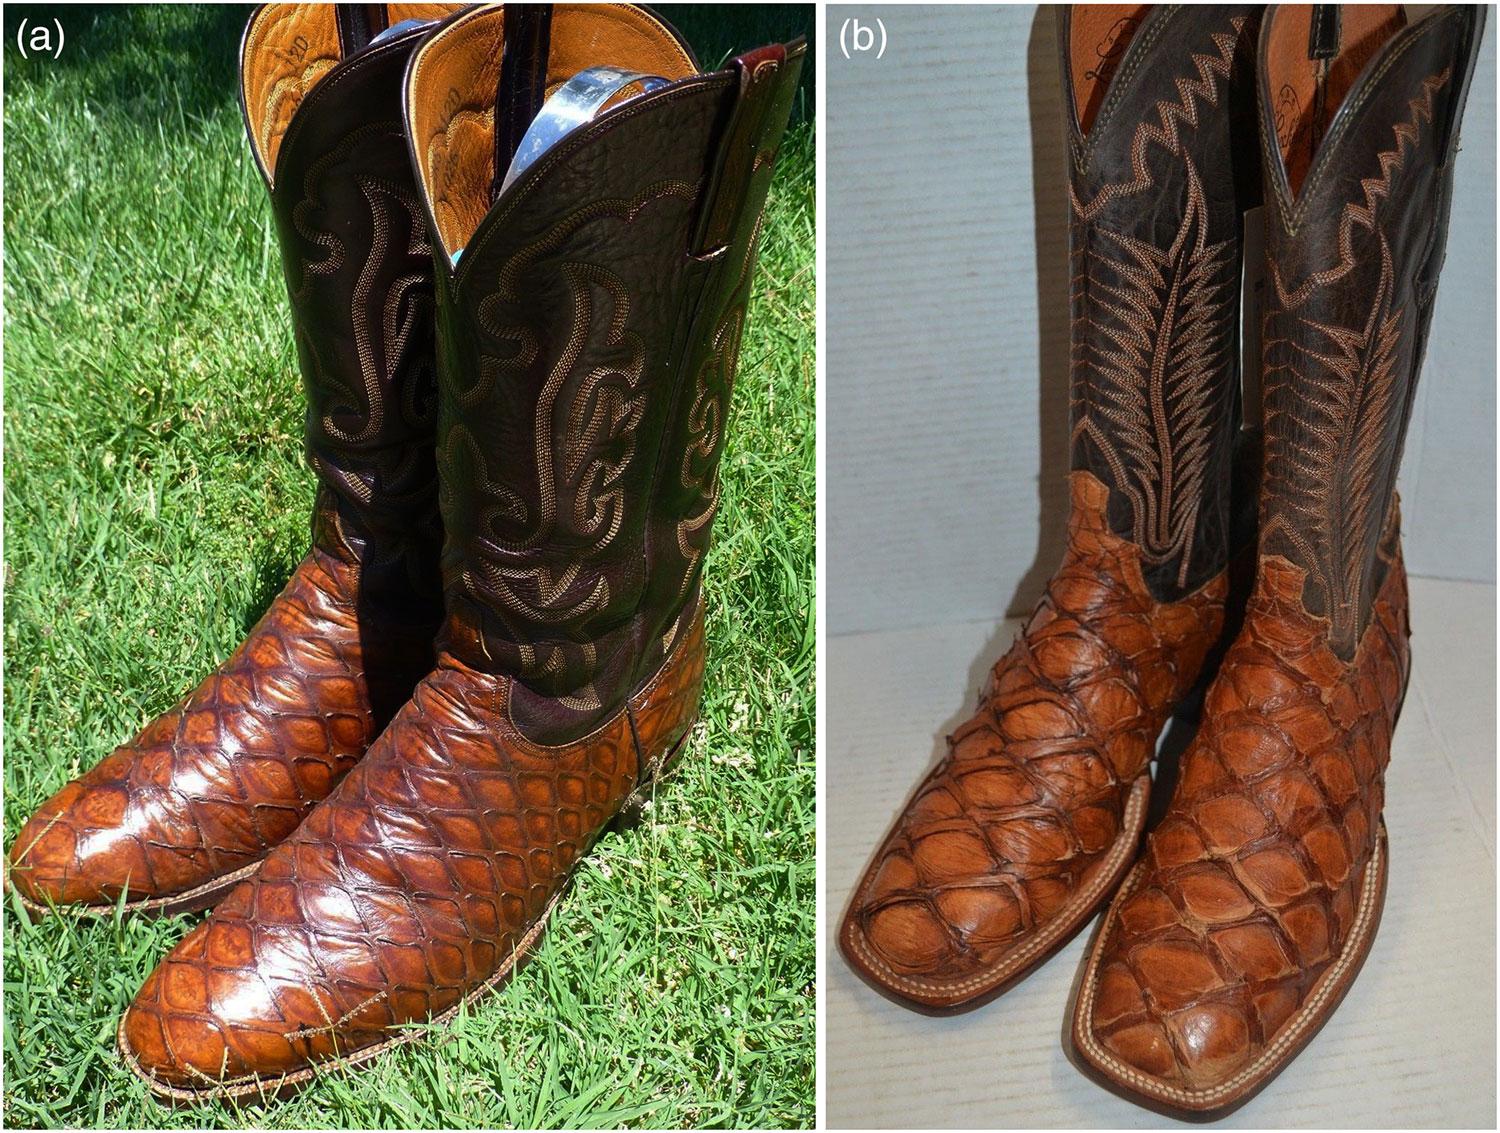 No yee-haw: What endangered creature are your cowboy boots made from? |  Faculty of Sciences, Engineering and Technology | University of Adelaide